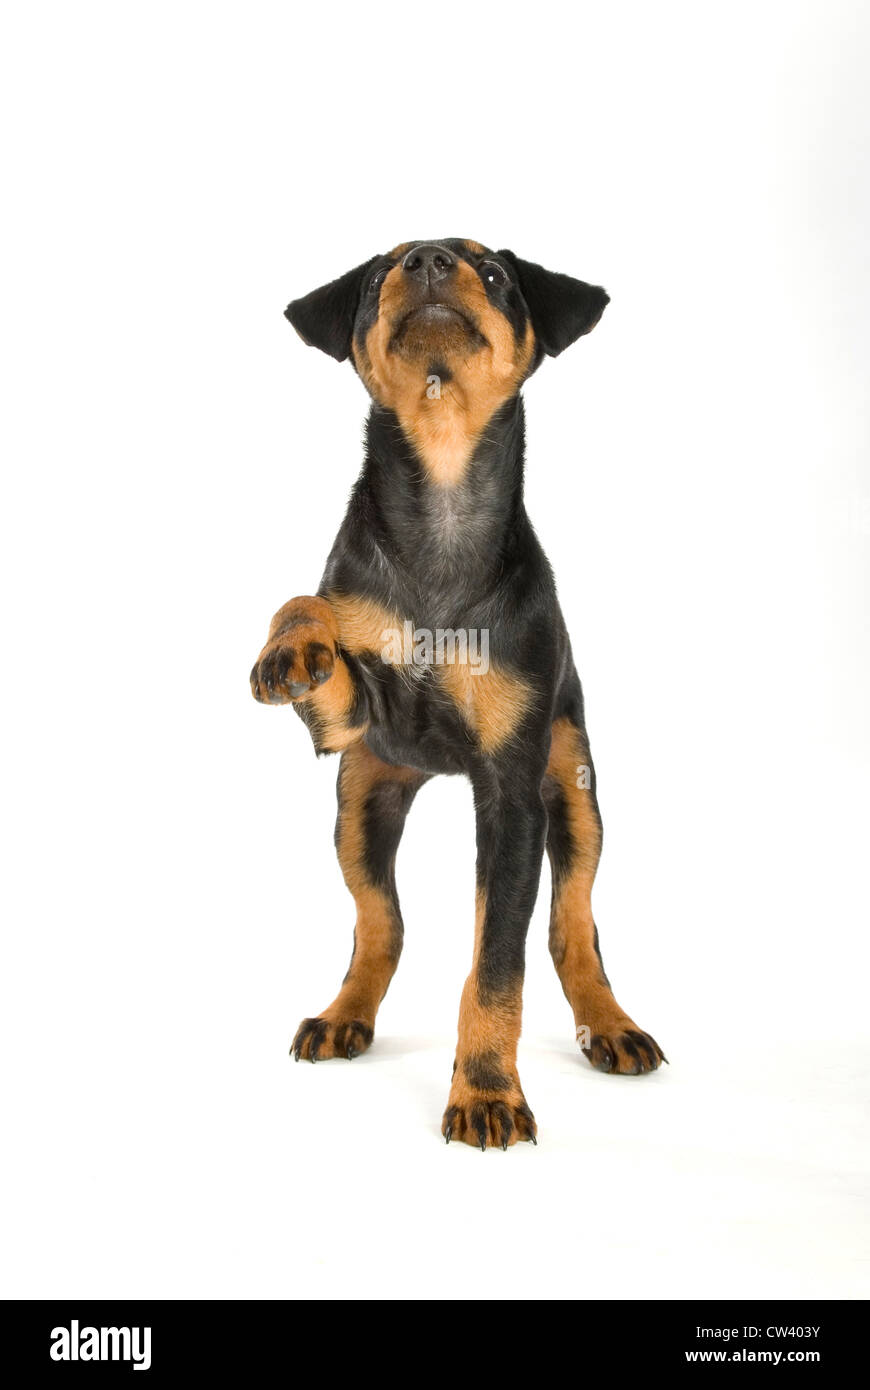 Jagdterrier, German Hunt Terrier. Puppy standing with paw raised. Studio picture against a white background Stock Photo